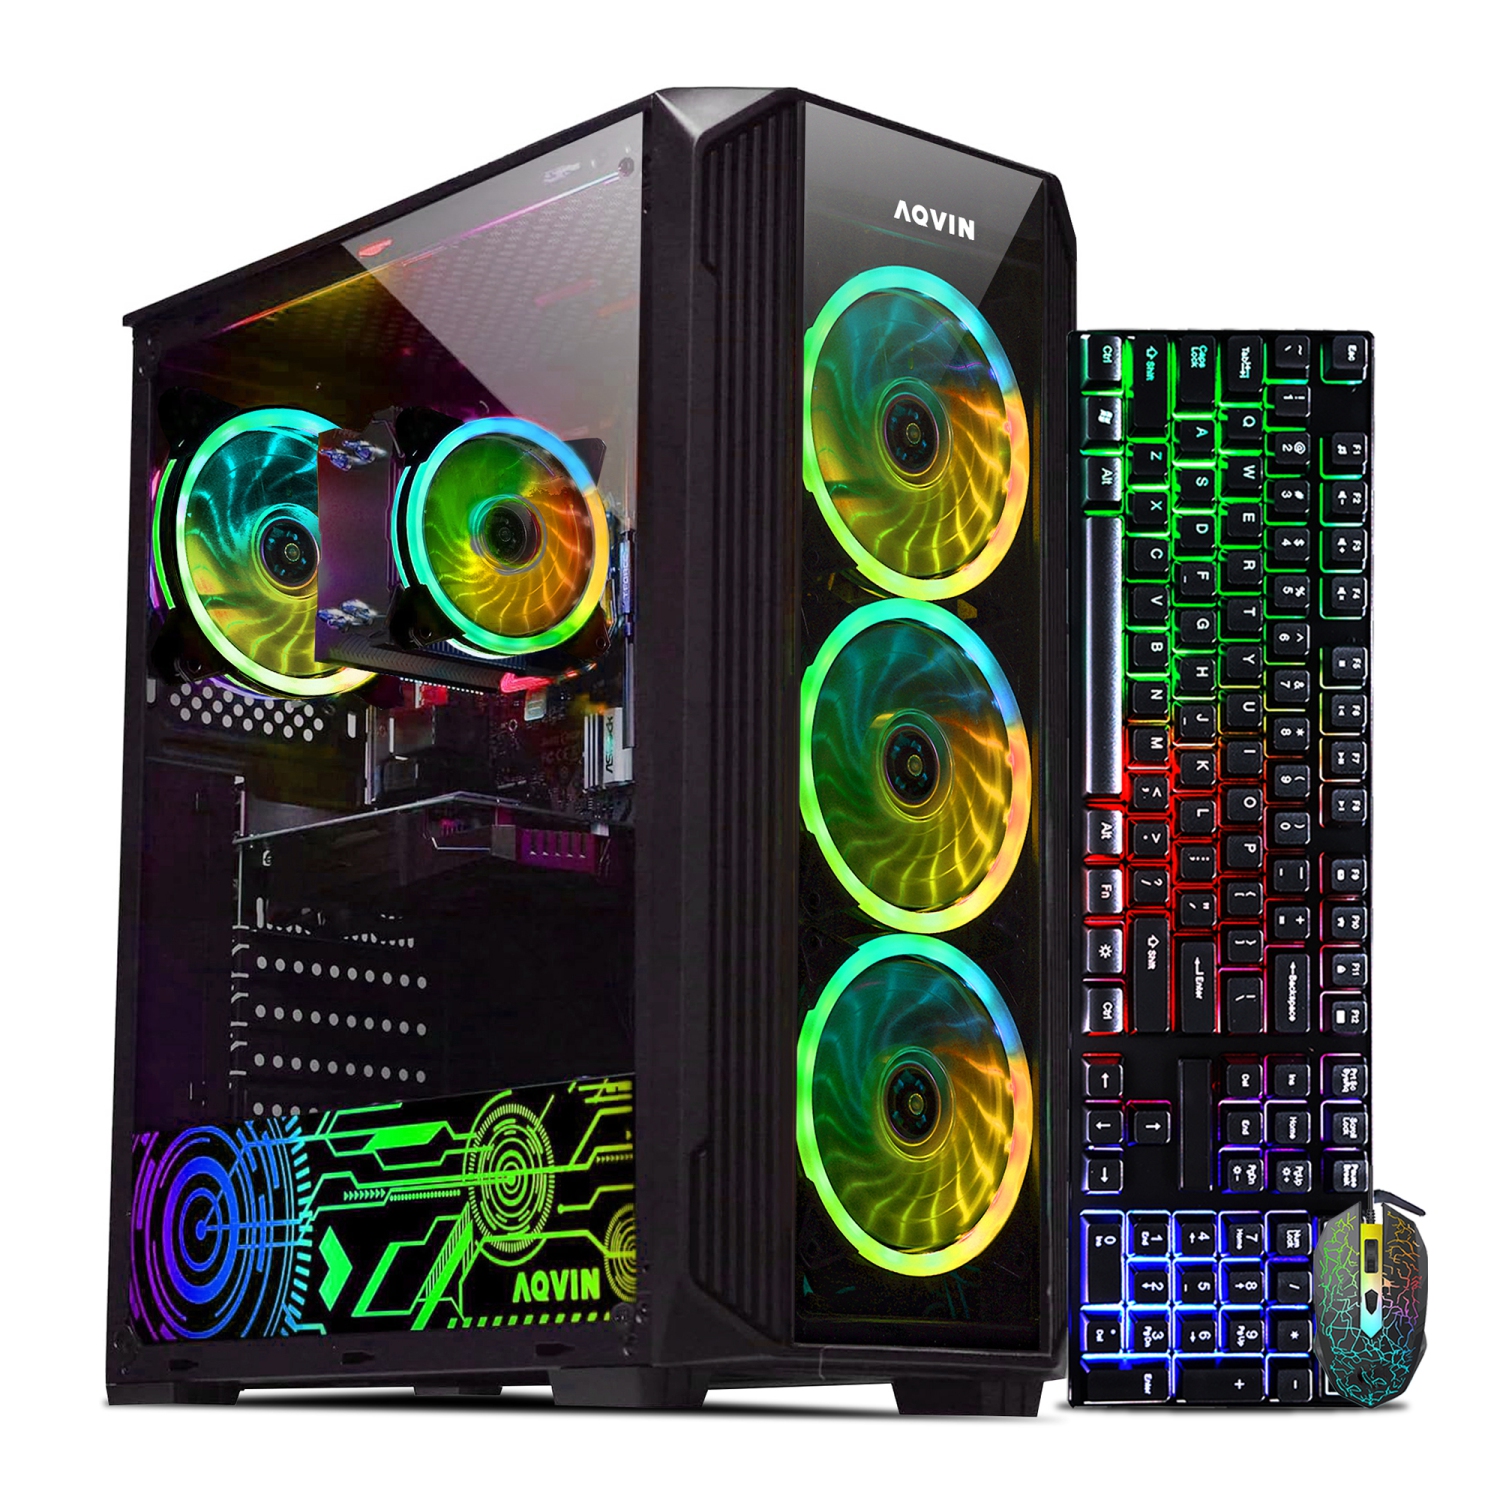 Refurbished (Excellent) - Gaming PC AQVIN Z-Force Desktop Computer (Core i7/ New 512GB SSD/ 32GB DDR4 RAM/ AMD RX 550 Graphics Card/ Windows 10 Pro) WIFI Ready - 1 year warranty